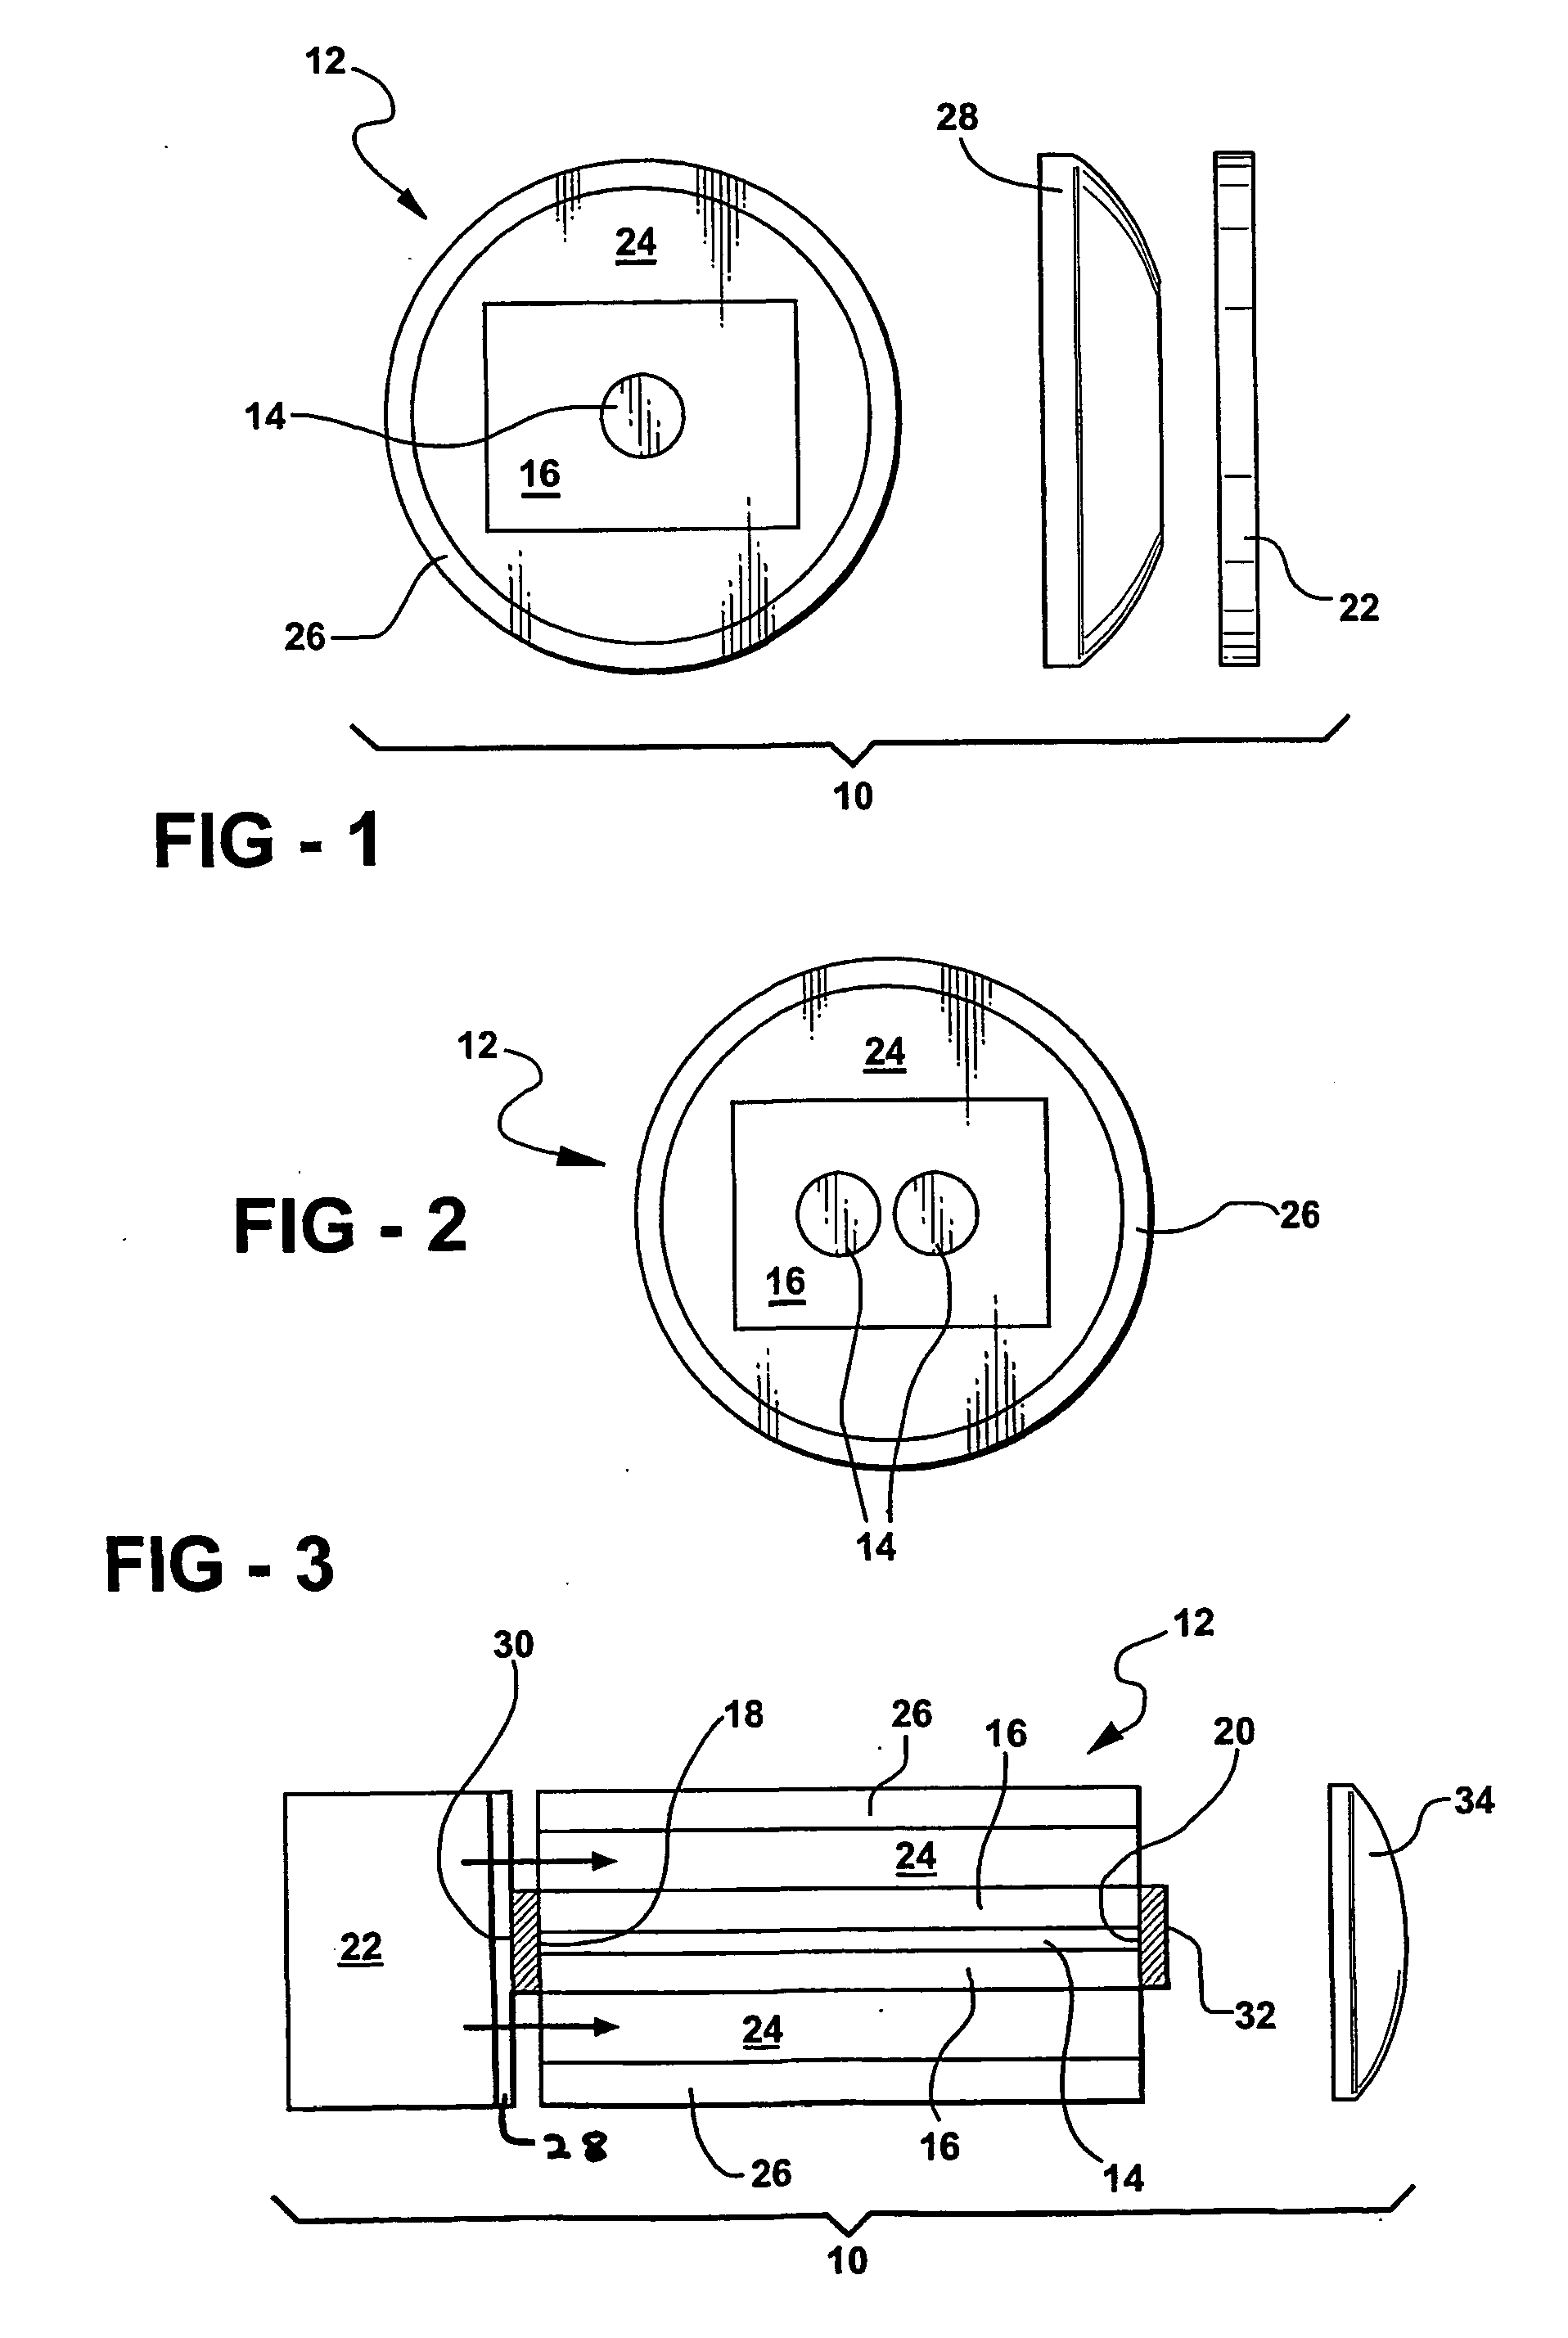 Method of transferring energy in an optical fiber laser structure using energy migration